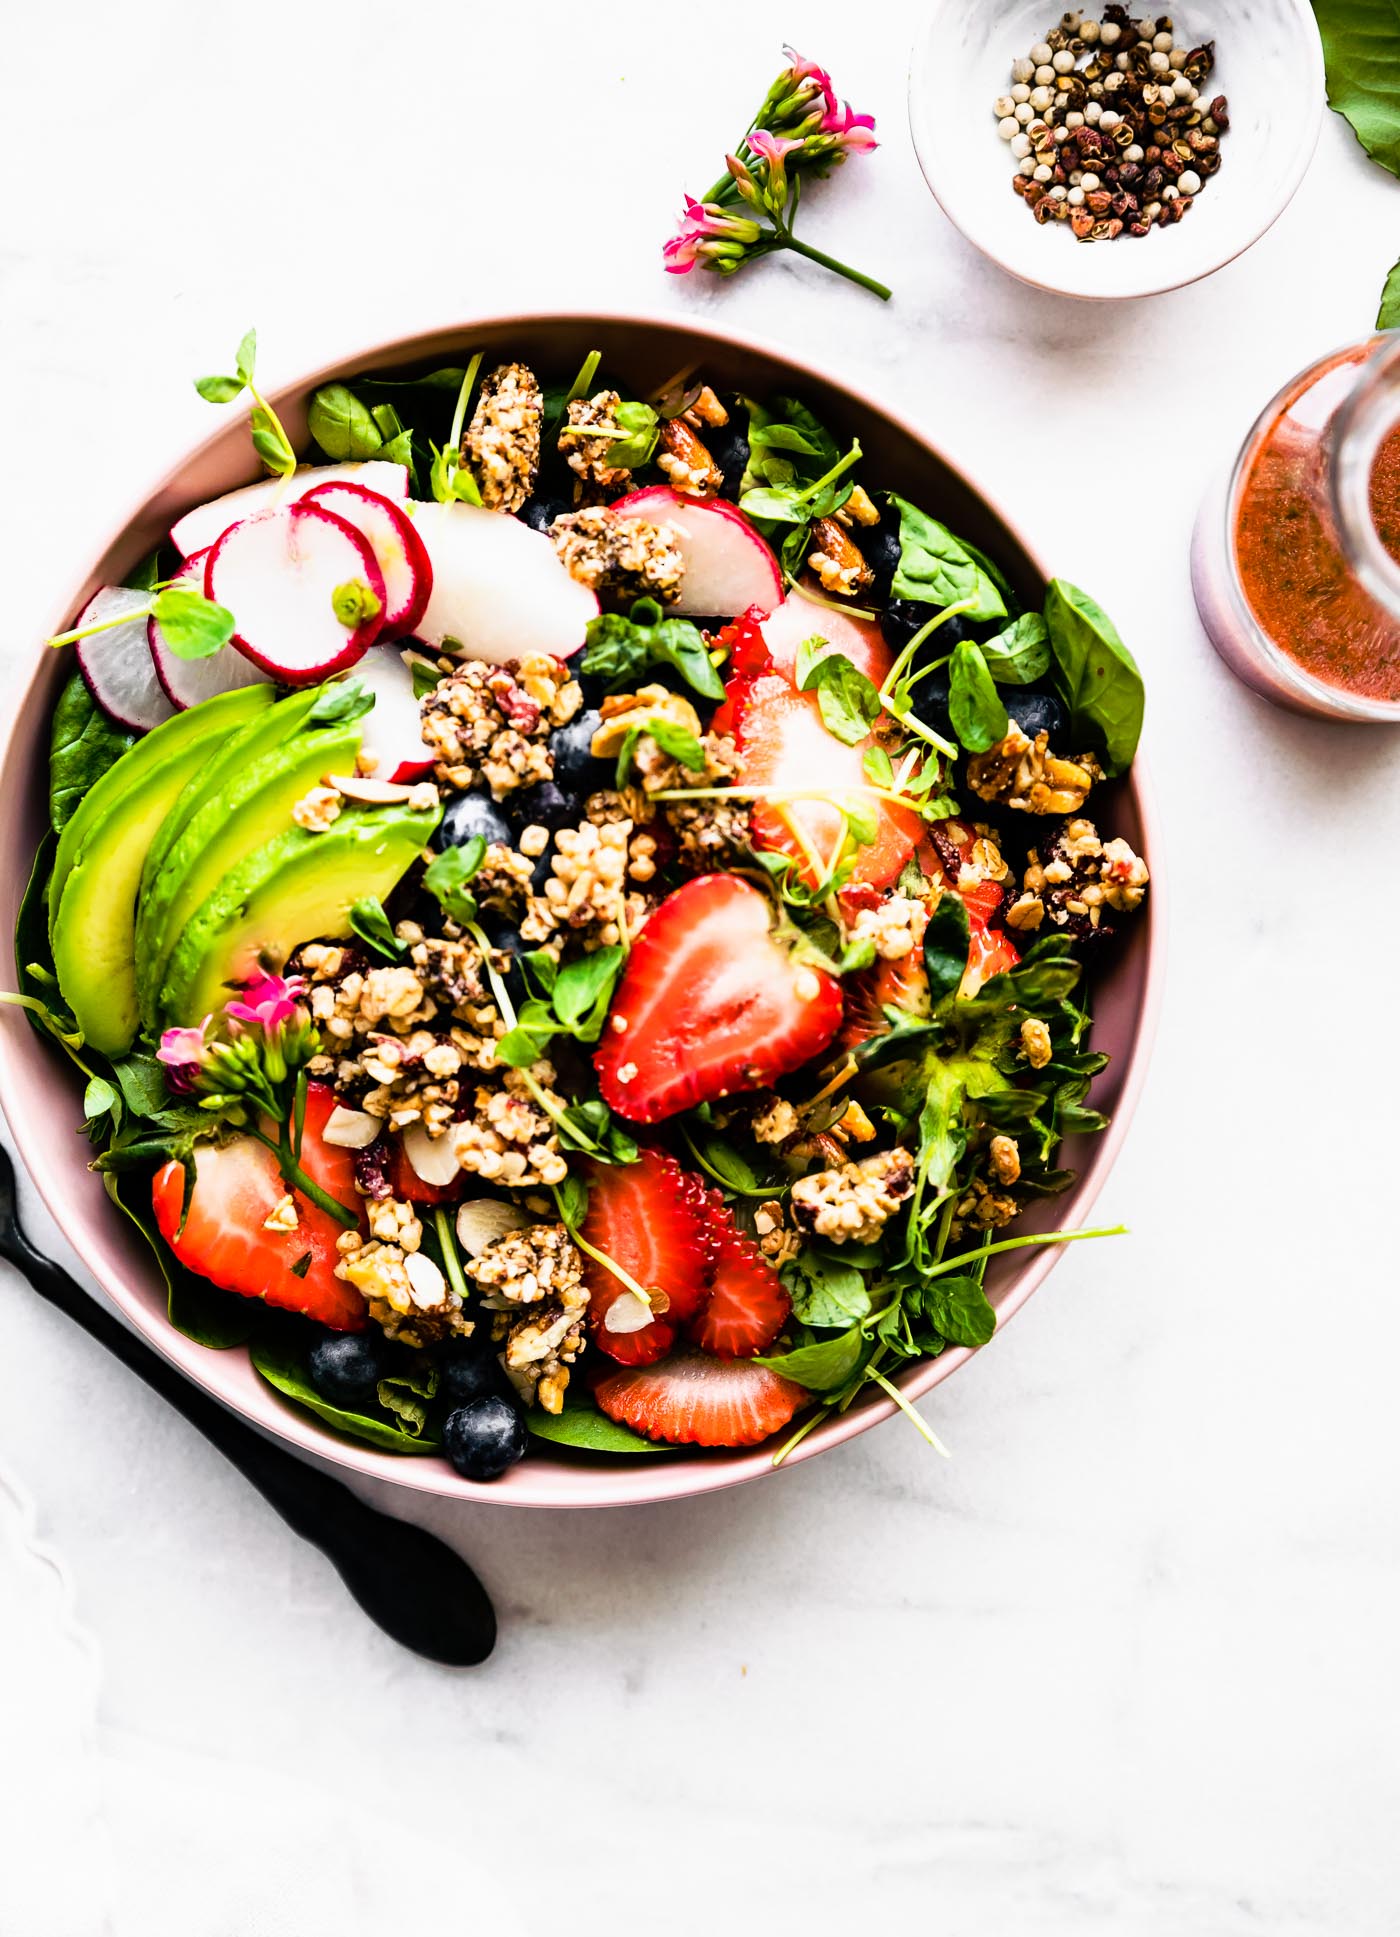 Strawberry spinach salad with vegetables and dressing served in pink bowl.